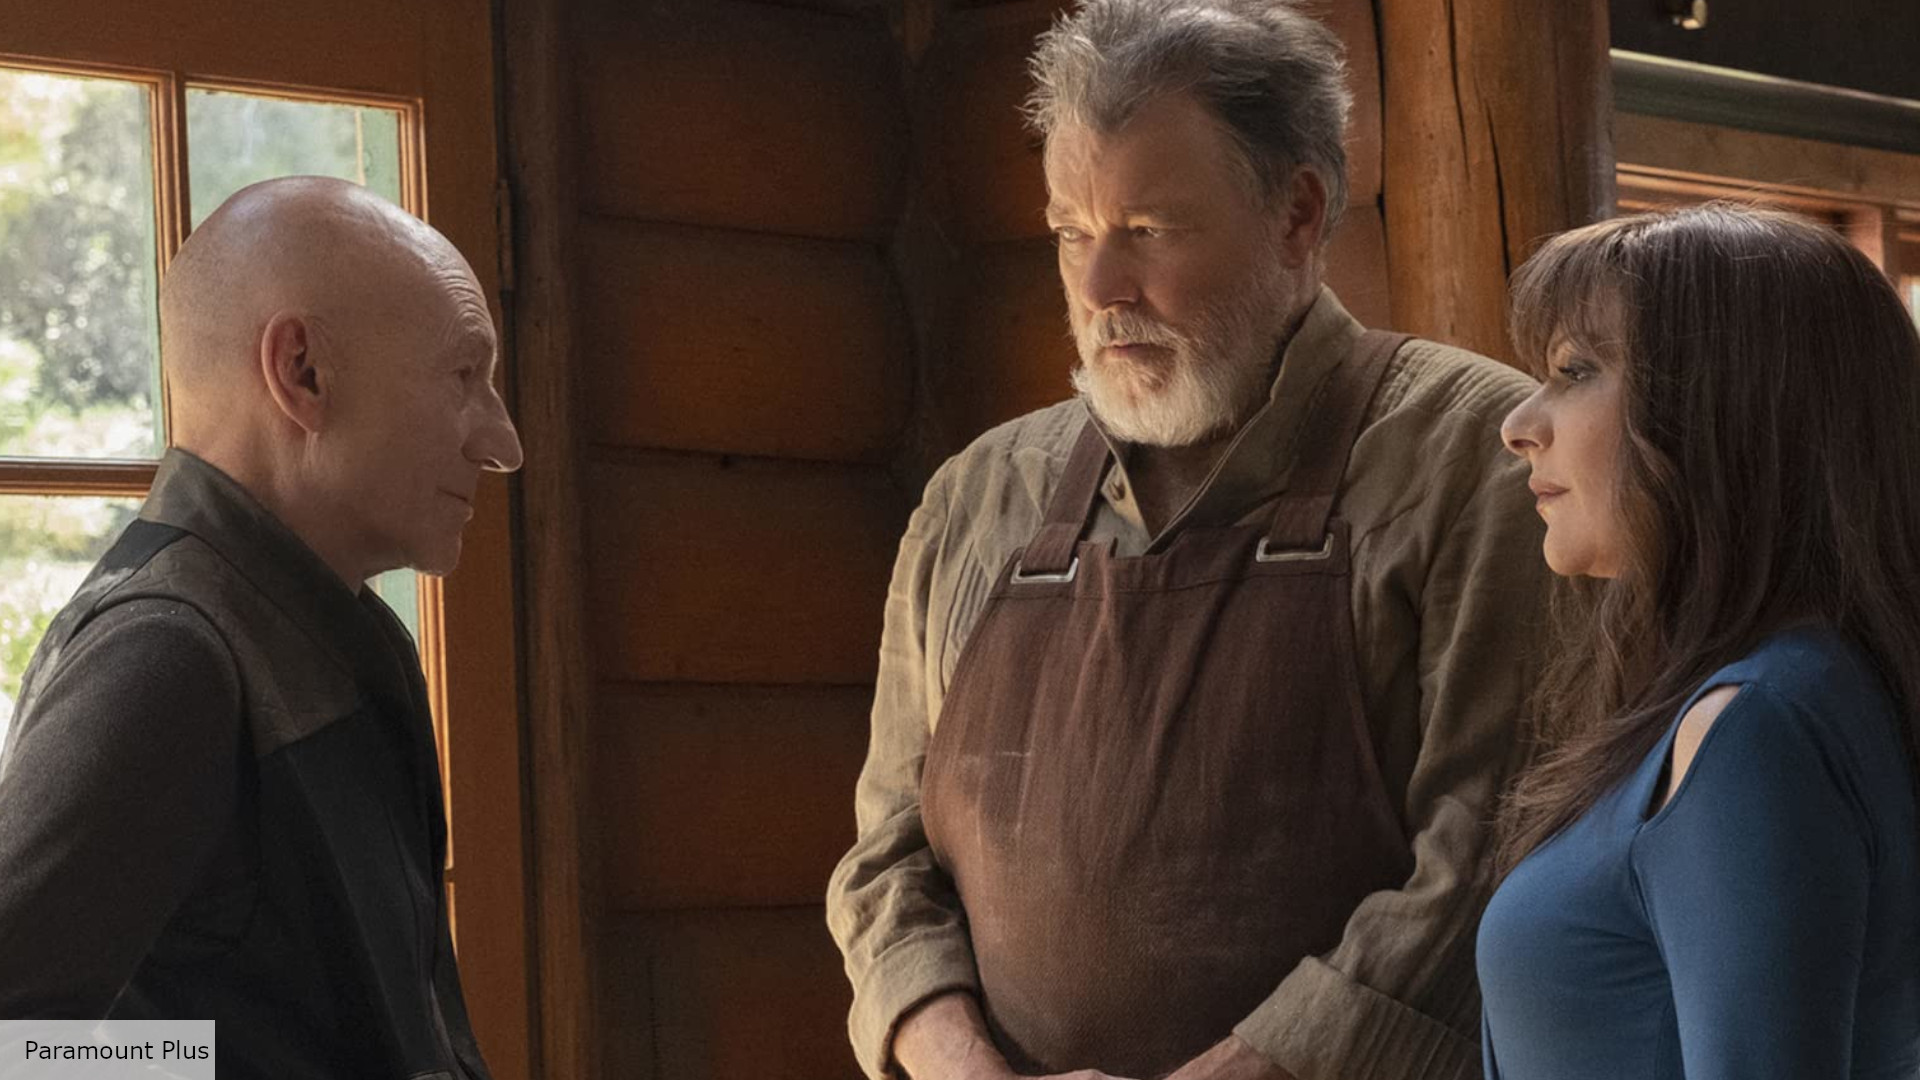 Star Trek: Picard season 3 release date speculation, cast, and more